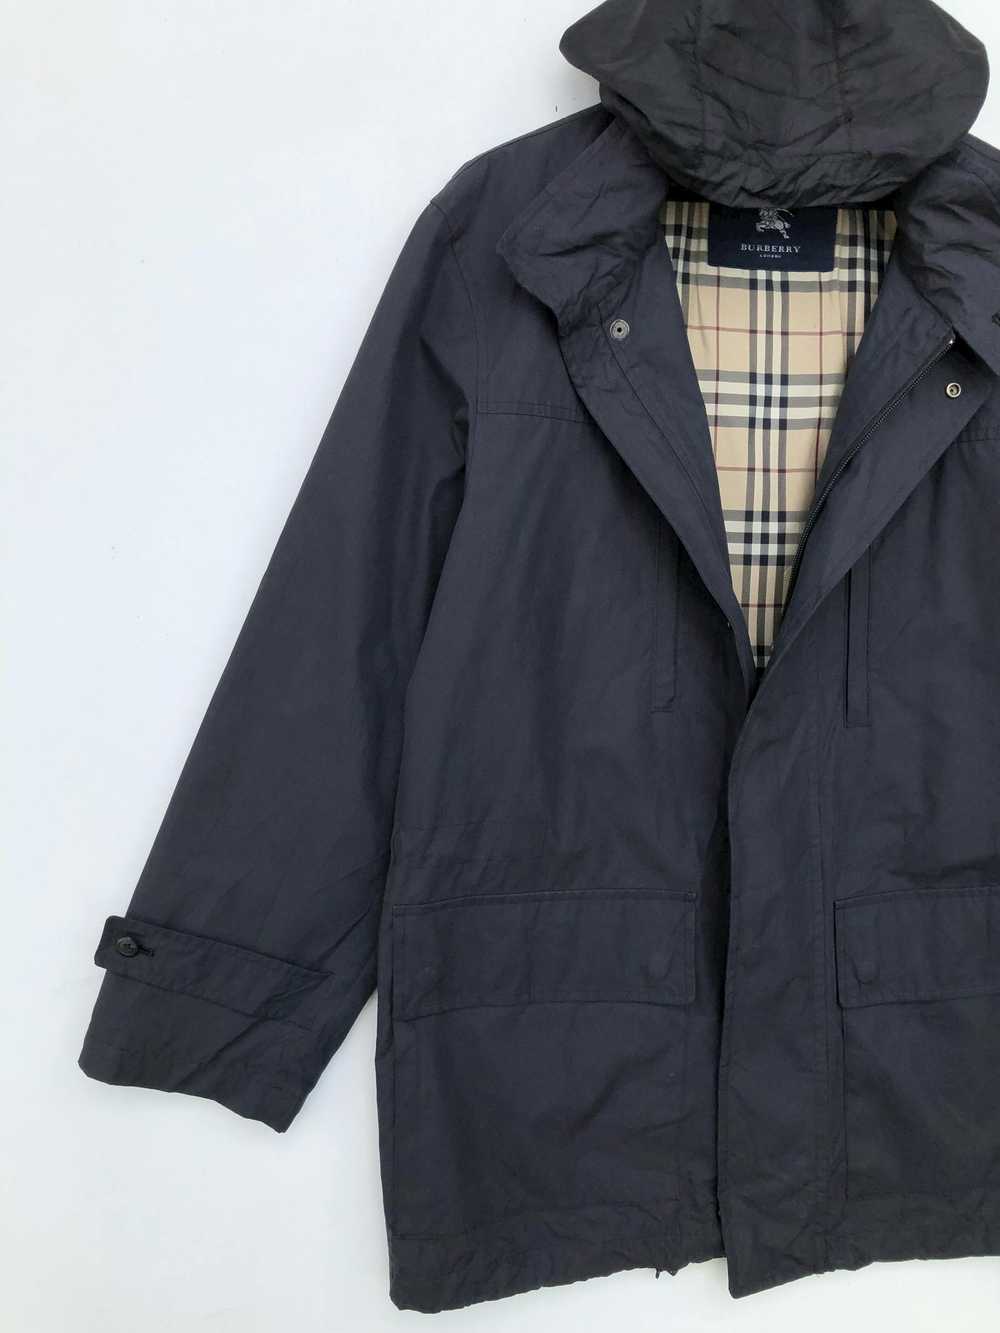 Burberry BURBERRY LIGHT JACKET MADE IN JAPAN - image 5